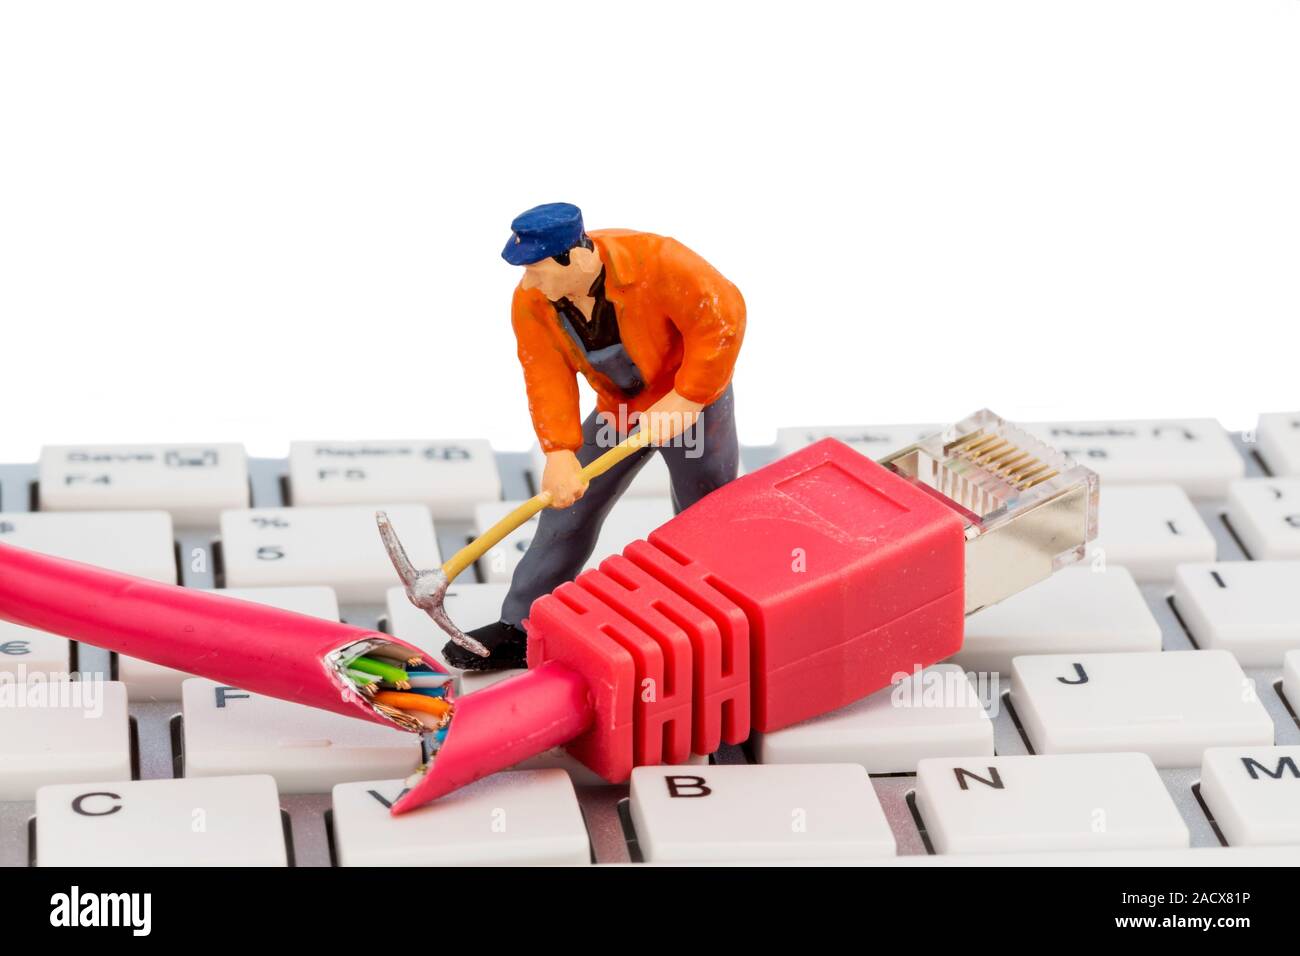 worker, network connector, keyboard Stock Photo